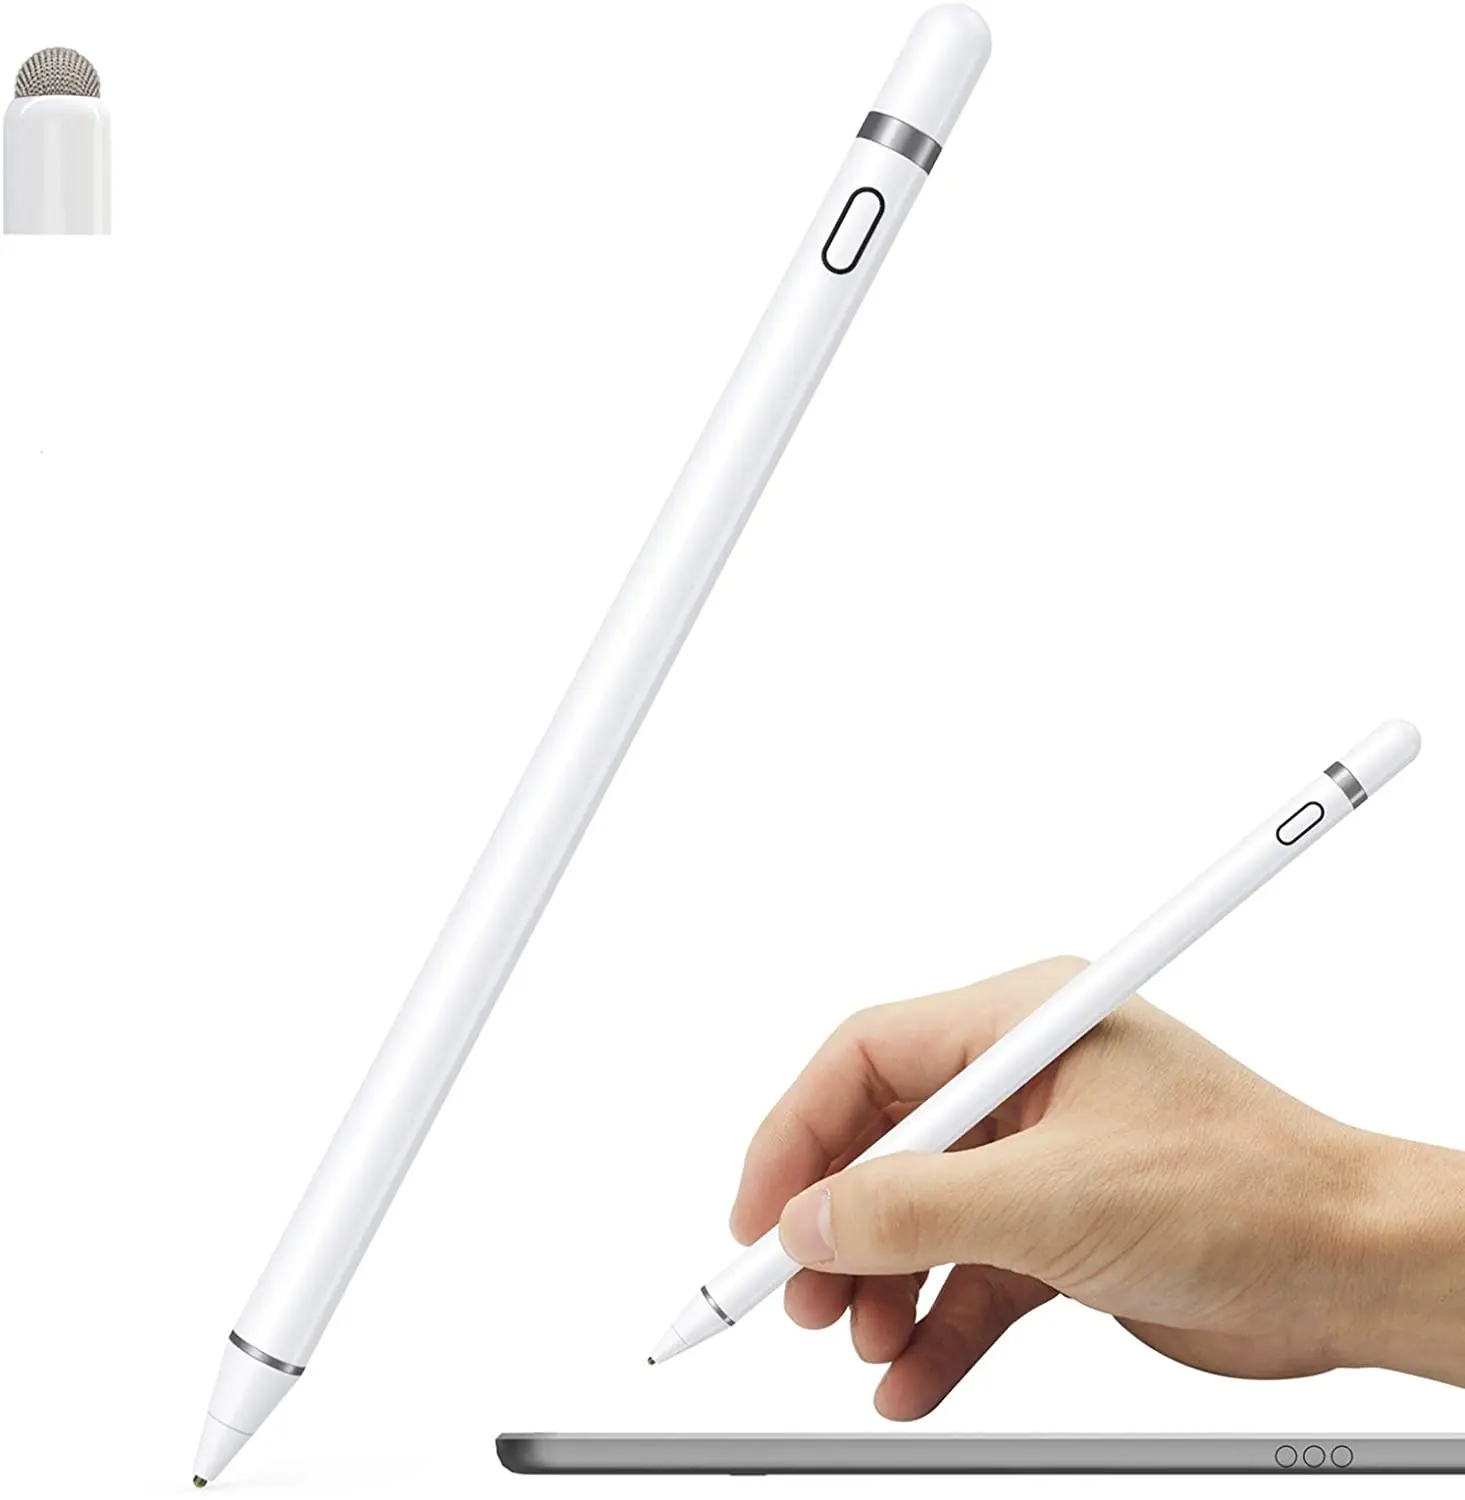 

BDD Universal 2 In 1 Rechargeable Copper Mesh Nib Touch Screen Ipad And Android Stylus Touch Pen For Android Phone Pencil, Black white